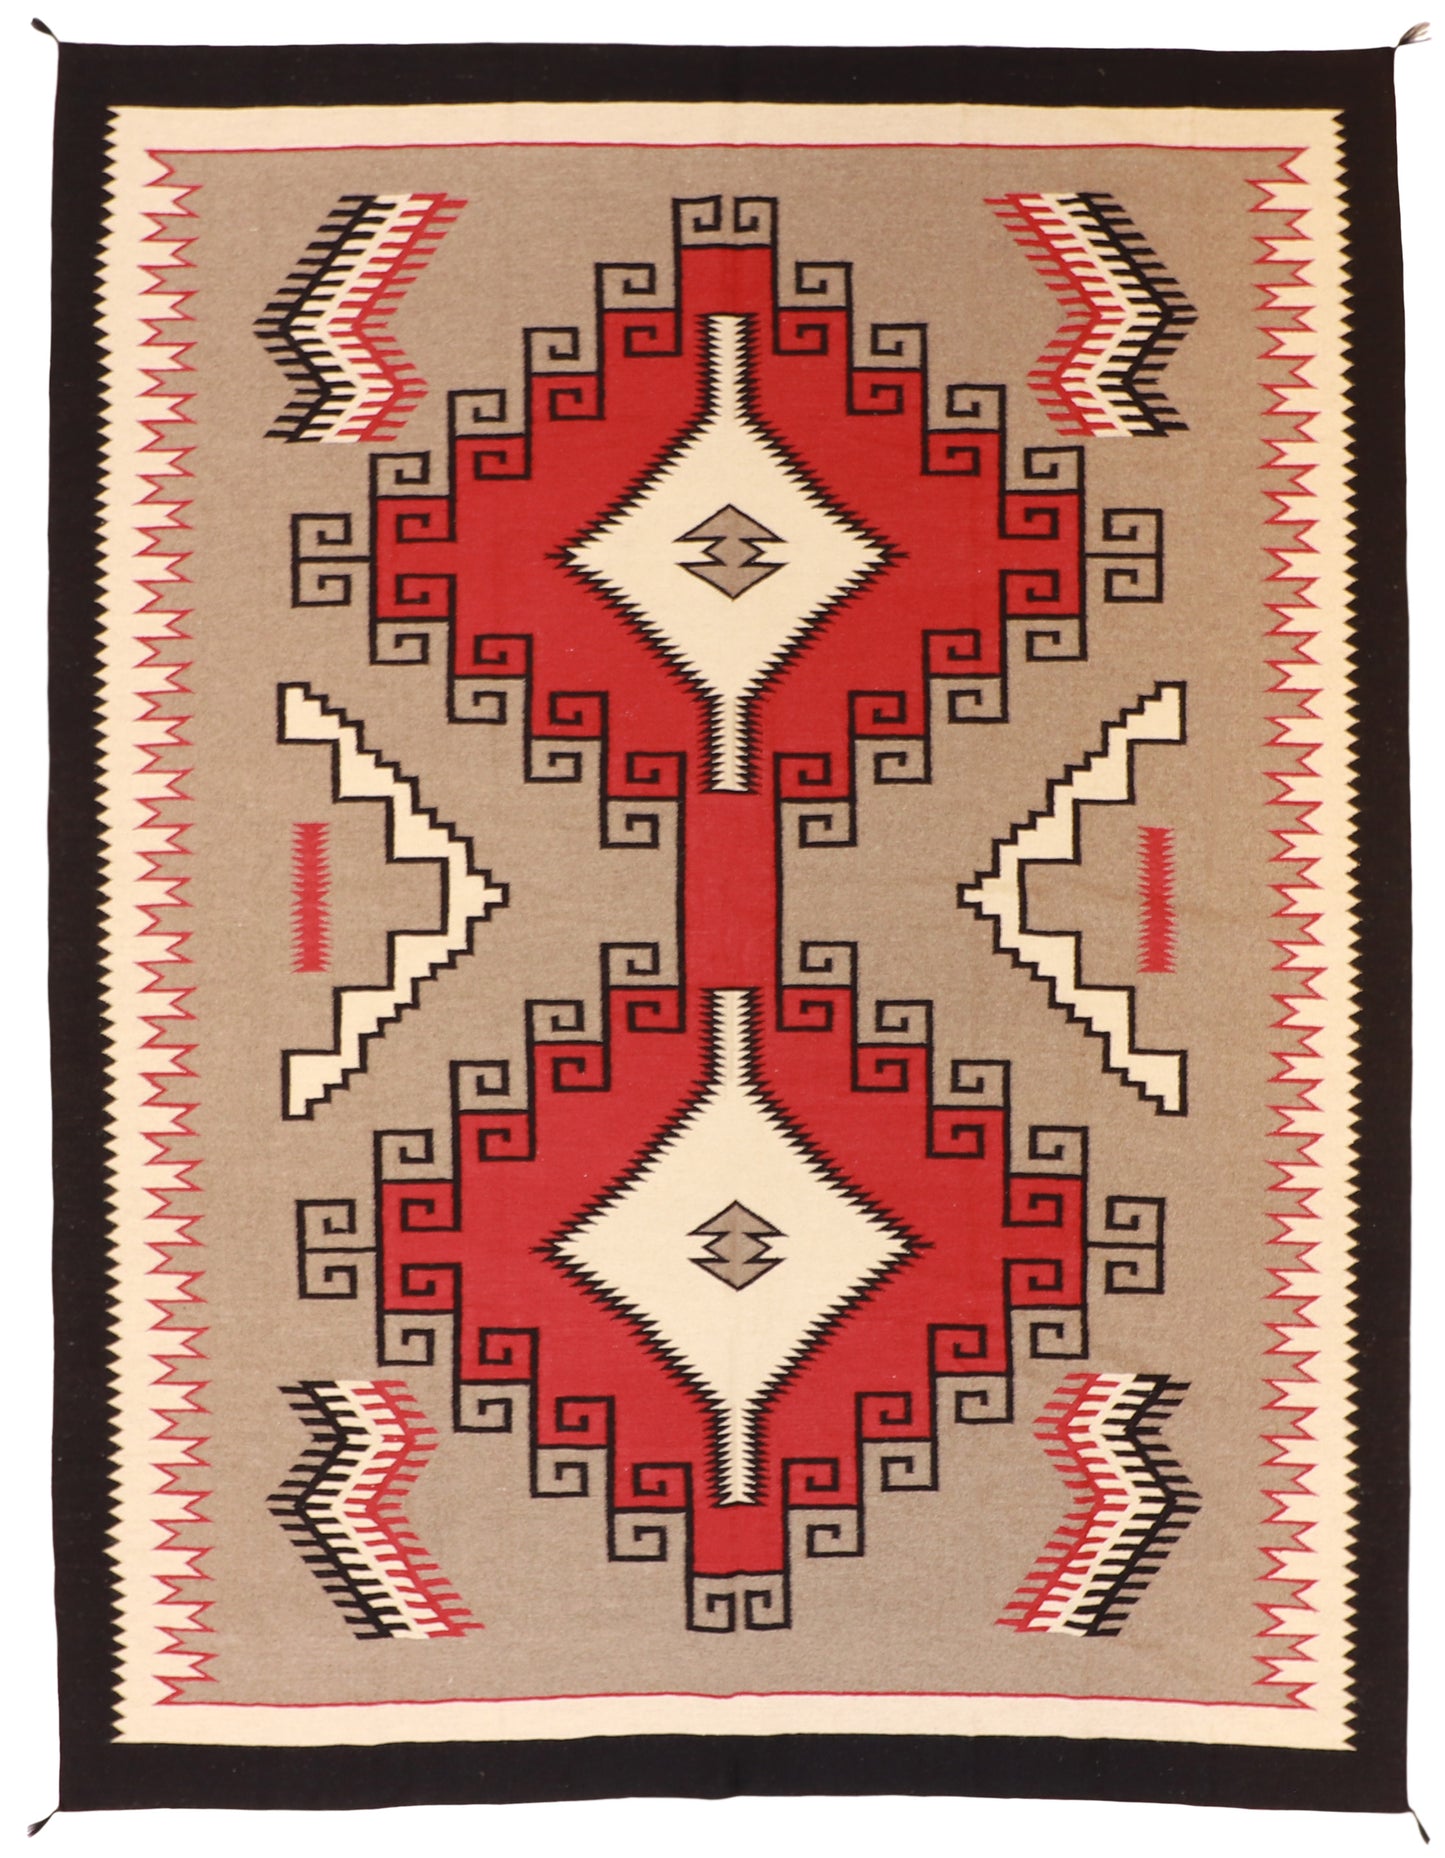 9x12 - Kilim Fine/Wool All Over Rectangle - Hand Knotted Rug